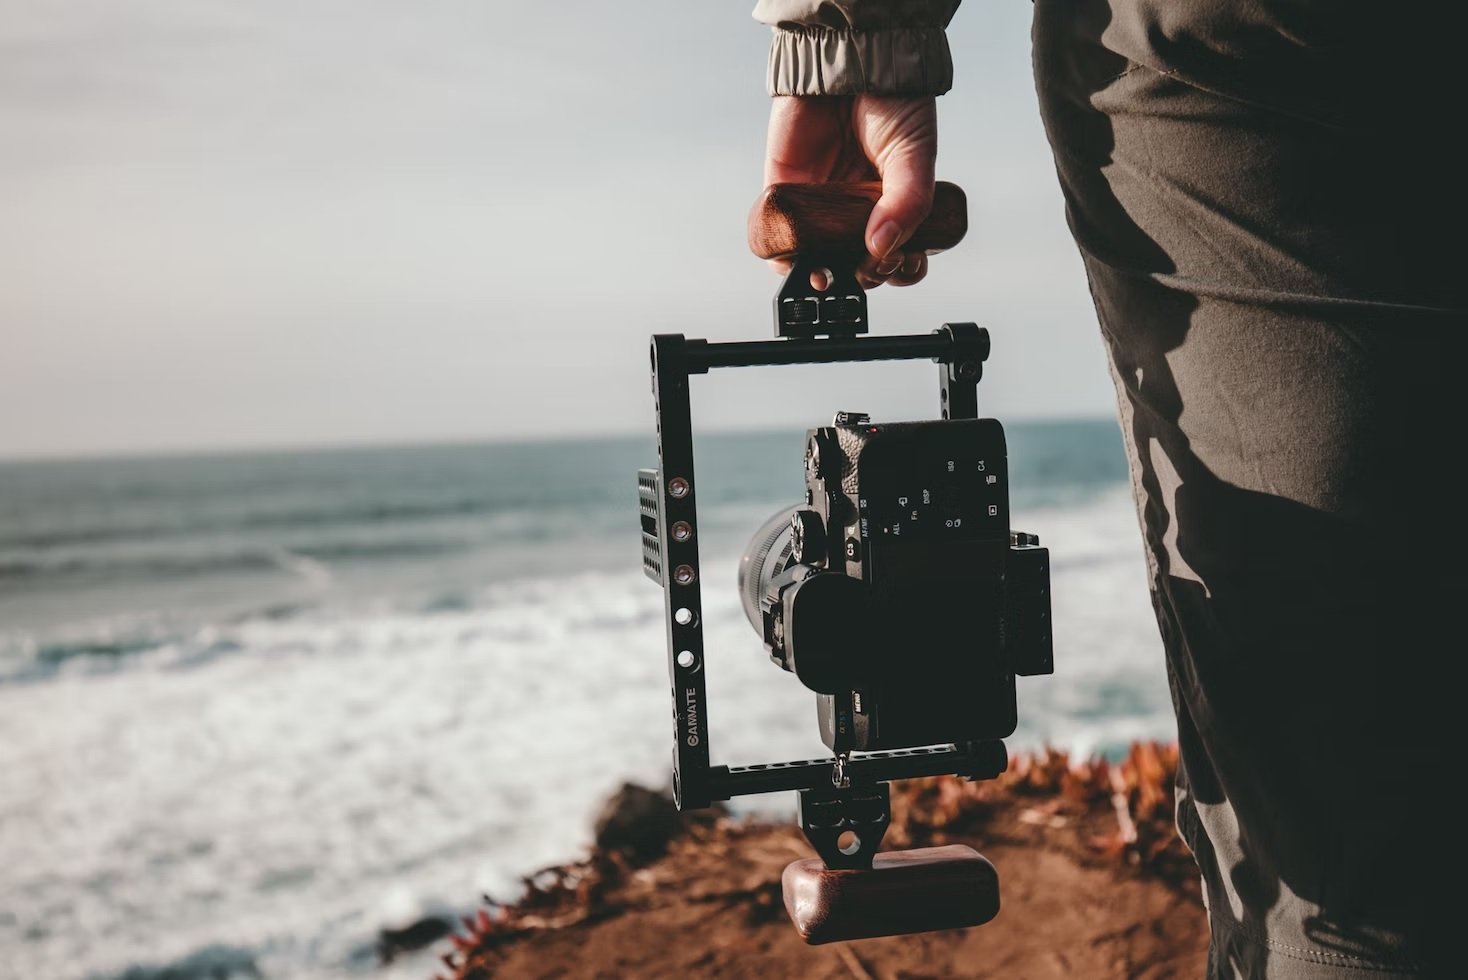 Hand holding a camera in a camera stabilizer cage on the beach